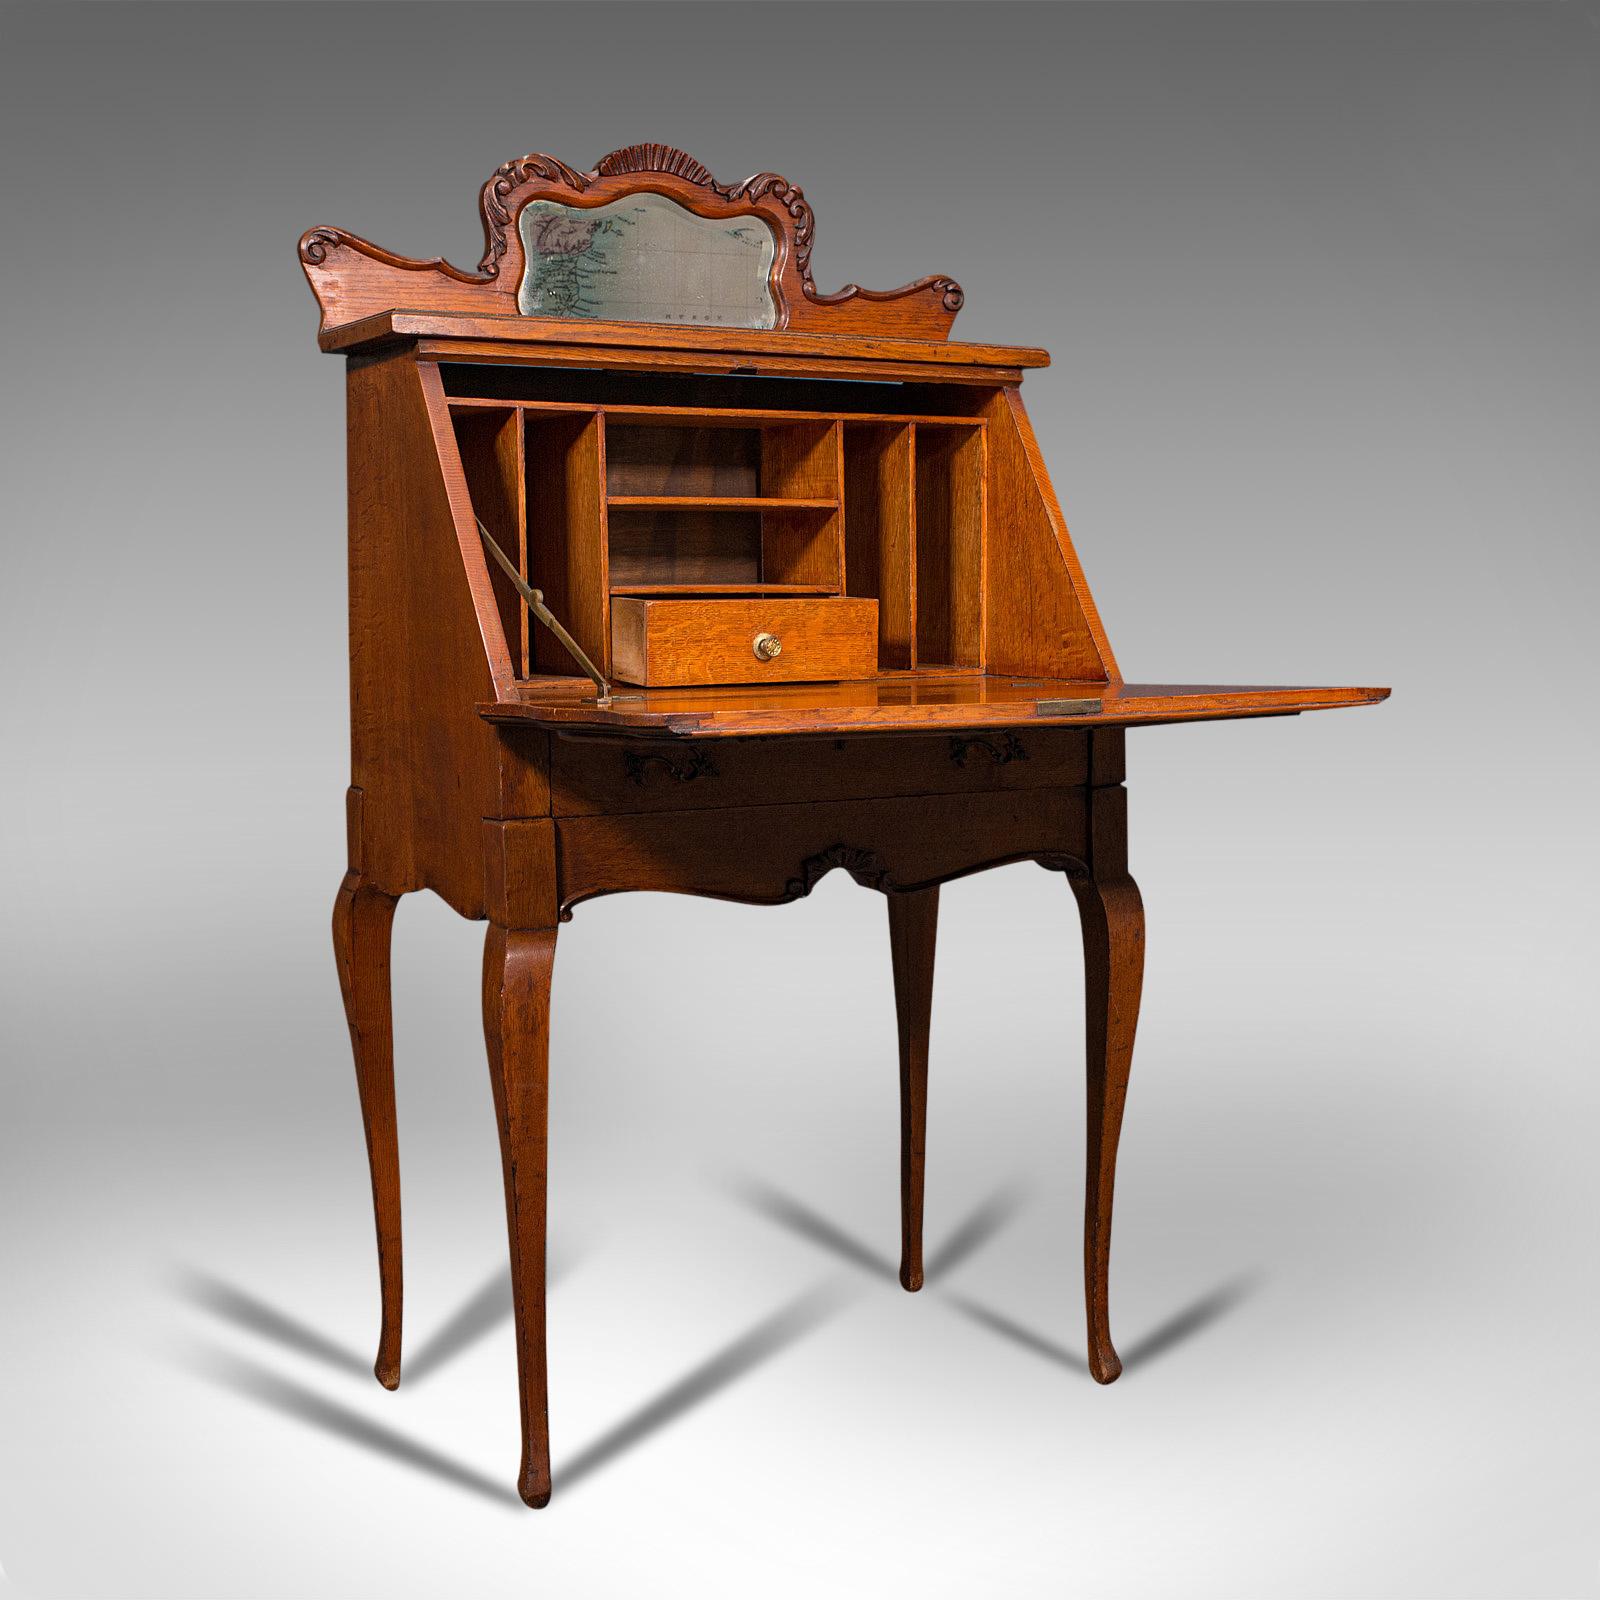 This is a small antique ladies writing desk. A French, oak bureau with mirror, dating to the Victorian period, circa 1900.

Of wonderful proportion and rich in colour
Displaying a desirable aged patina and in good order
Delightful light French